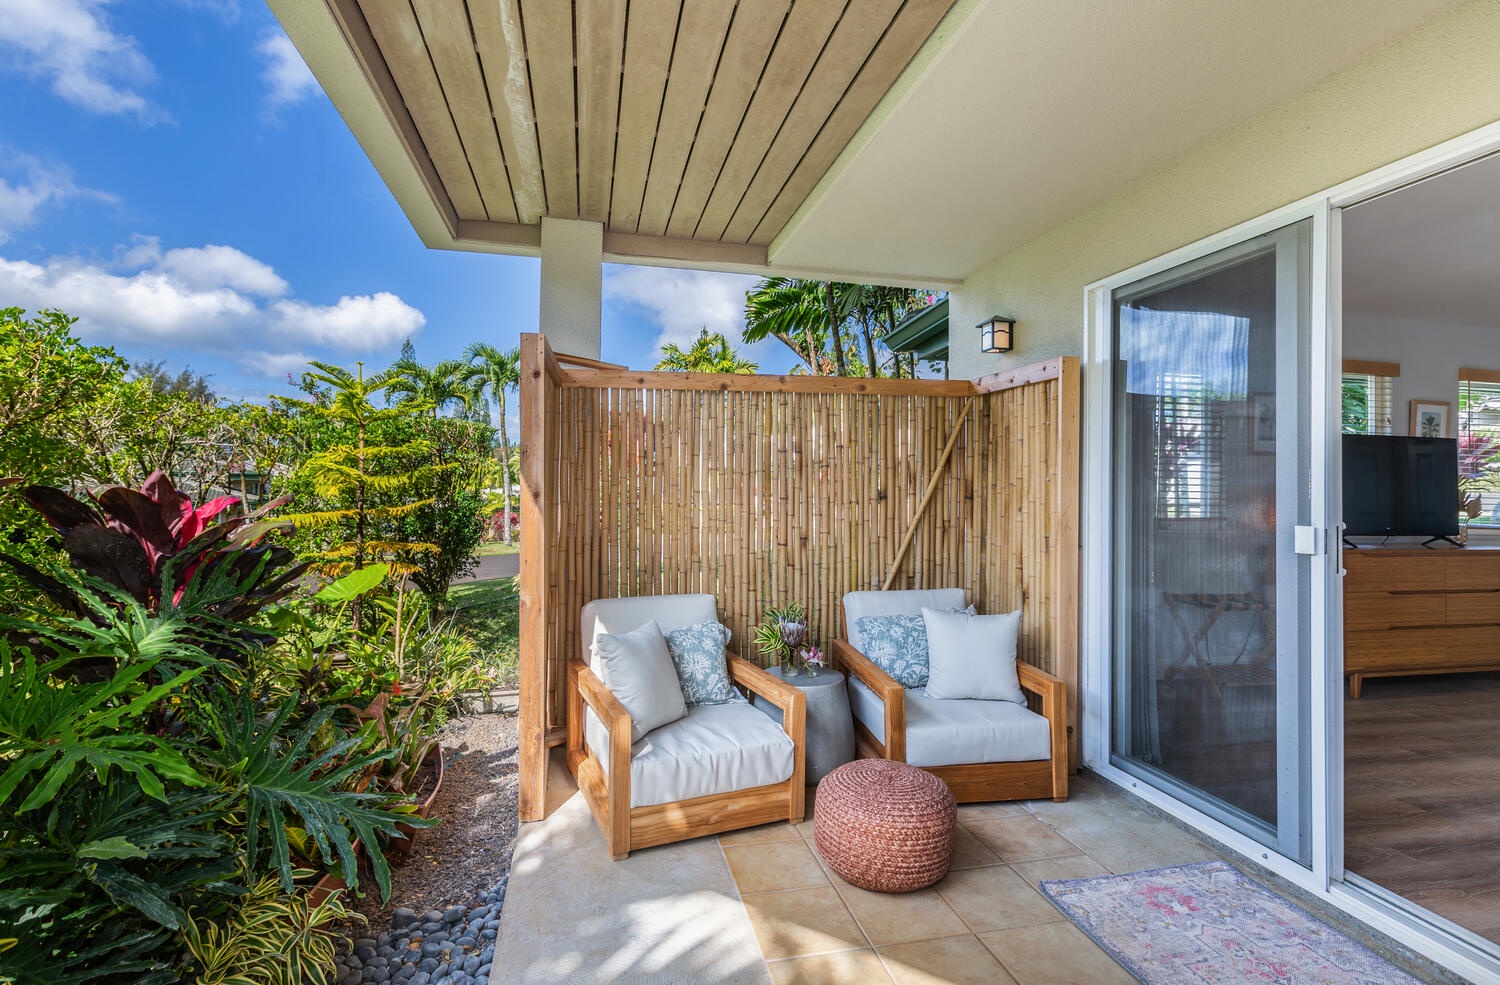 Princeville Vacation Rentals, Sea Glass - Cozy lanai corner, the perfect space for relaxation and privacy.